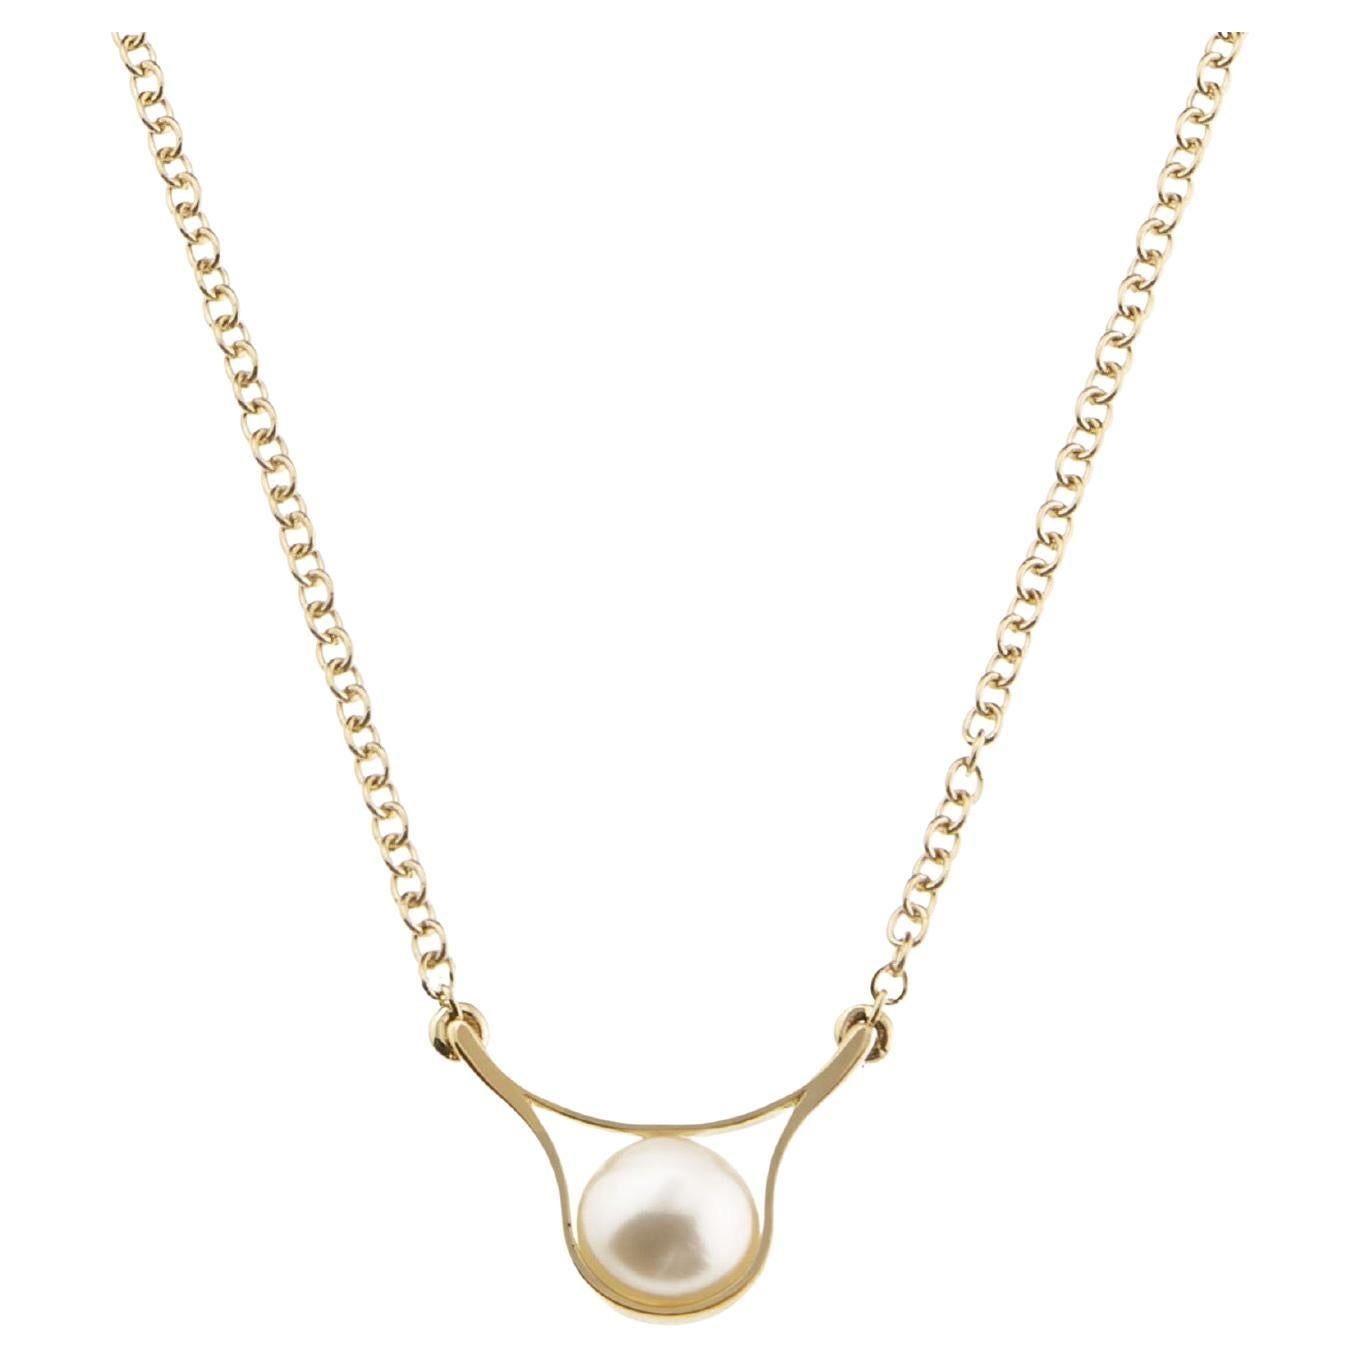 Nathalie Jean Contemporary Pearl Yellow Gold Pendentif Drop Chain Necklace